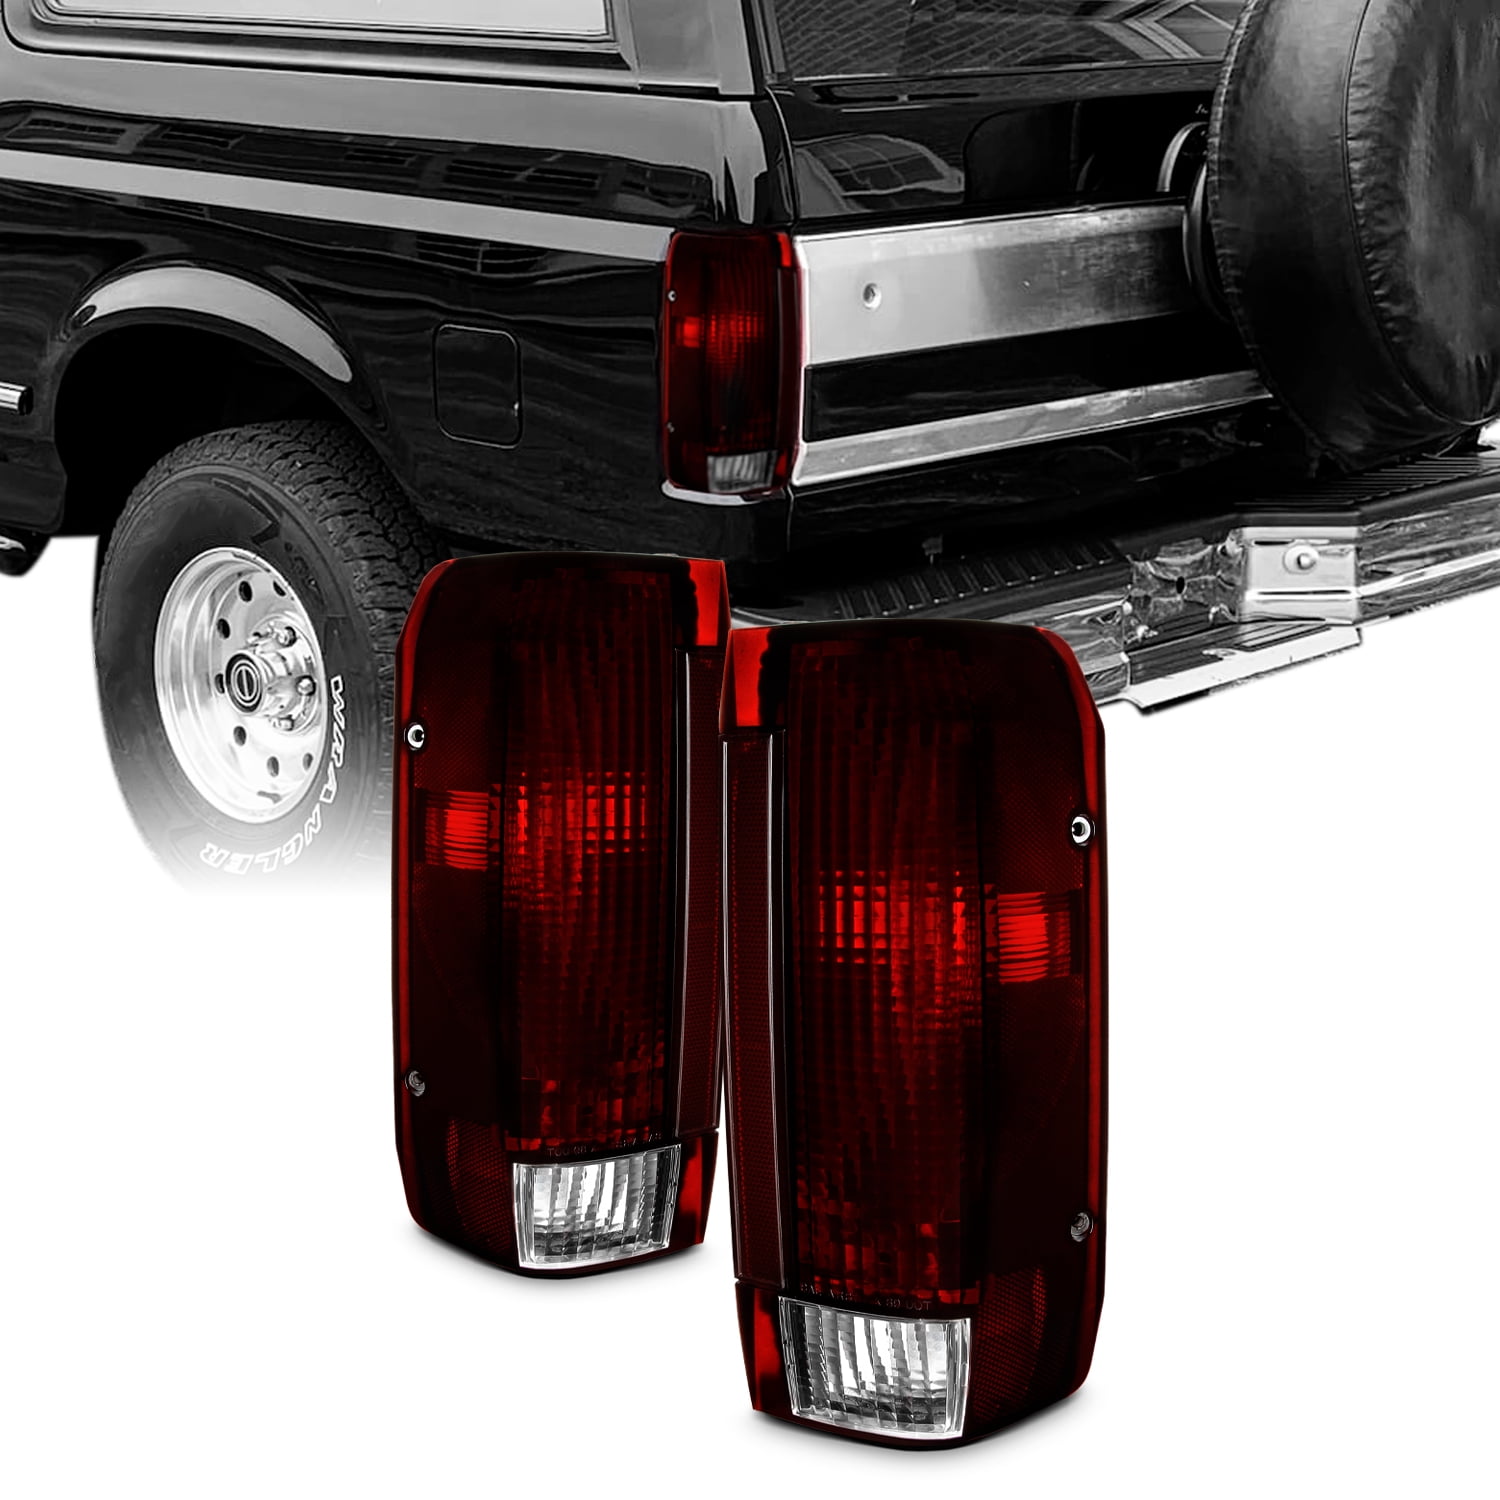 For Ford F150 Pickup Truck Styleside Body Generation II Full LED Black Tail Brake Lights Repalcement 